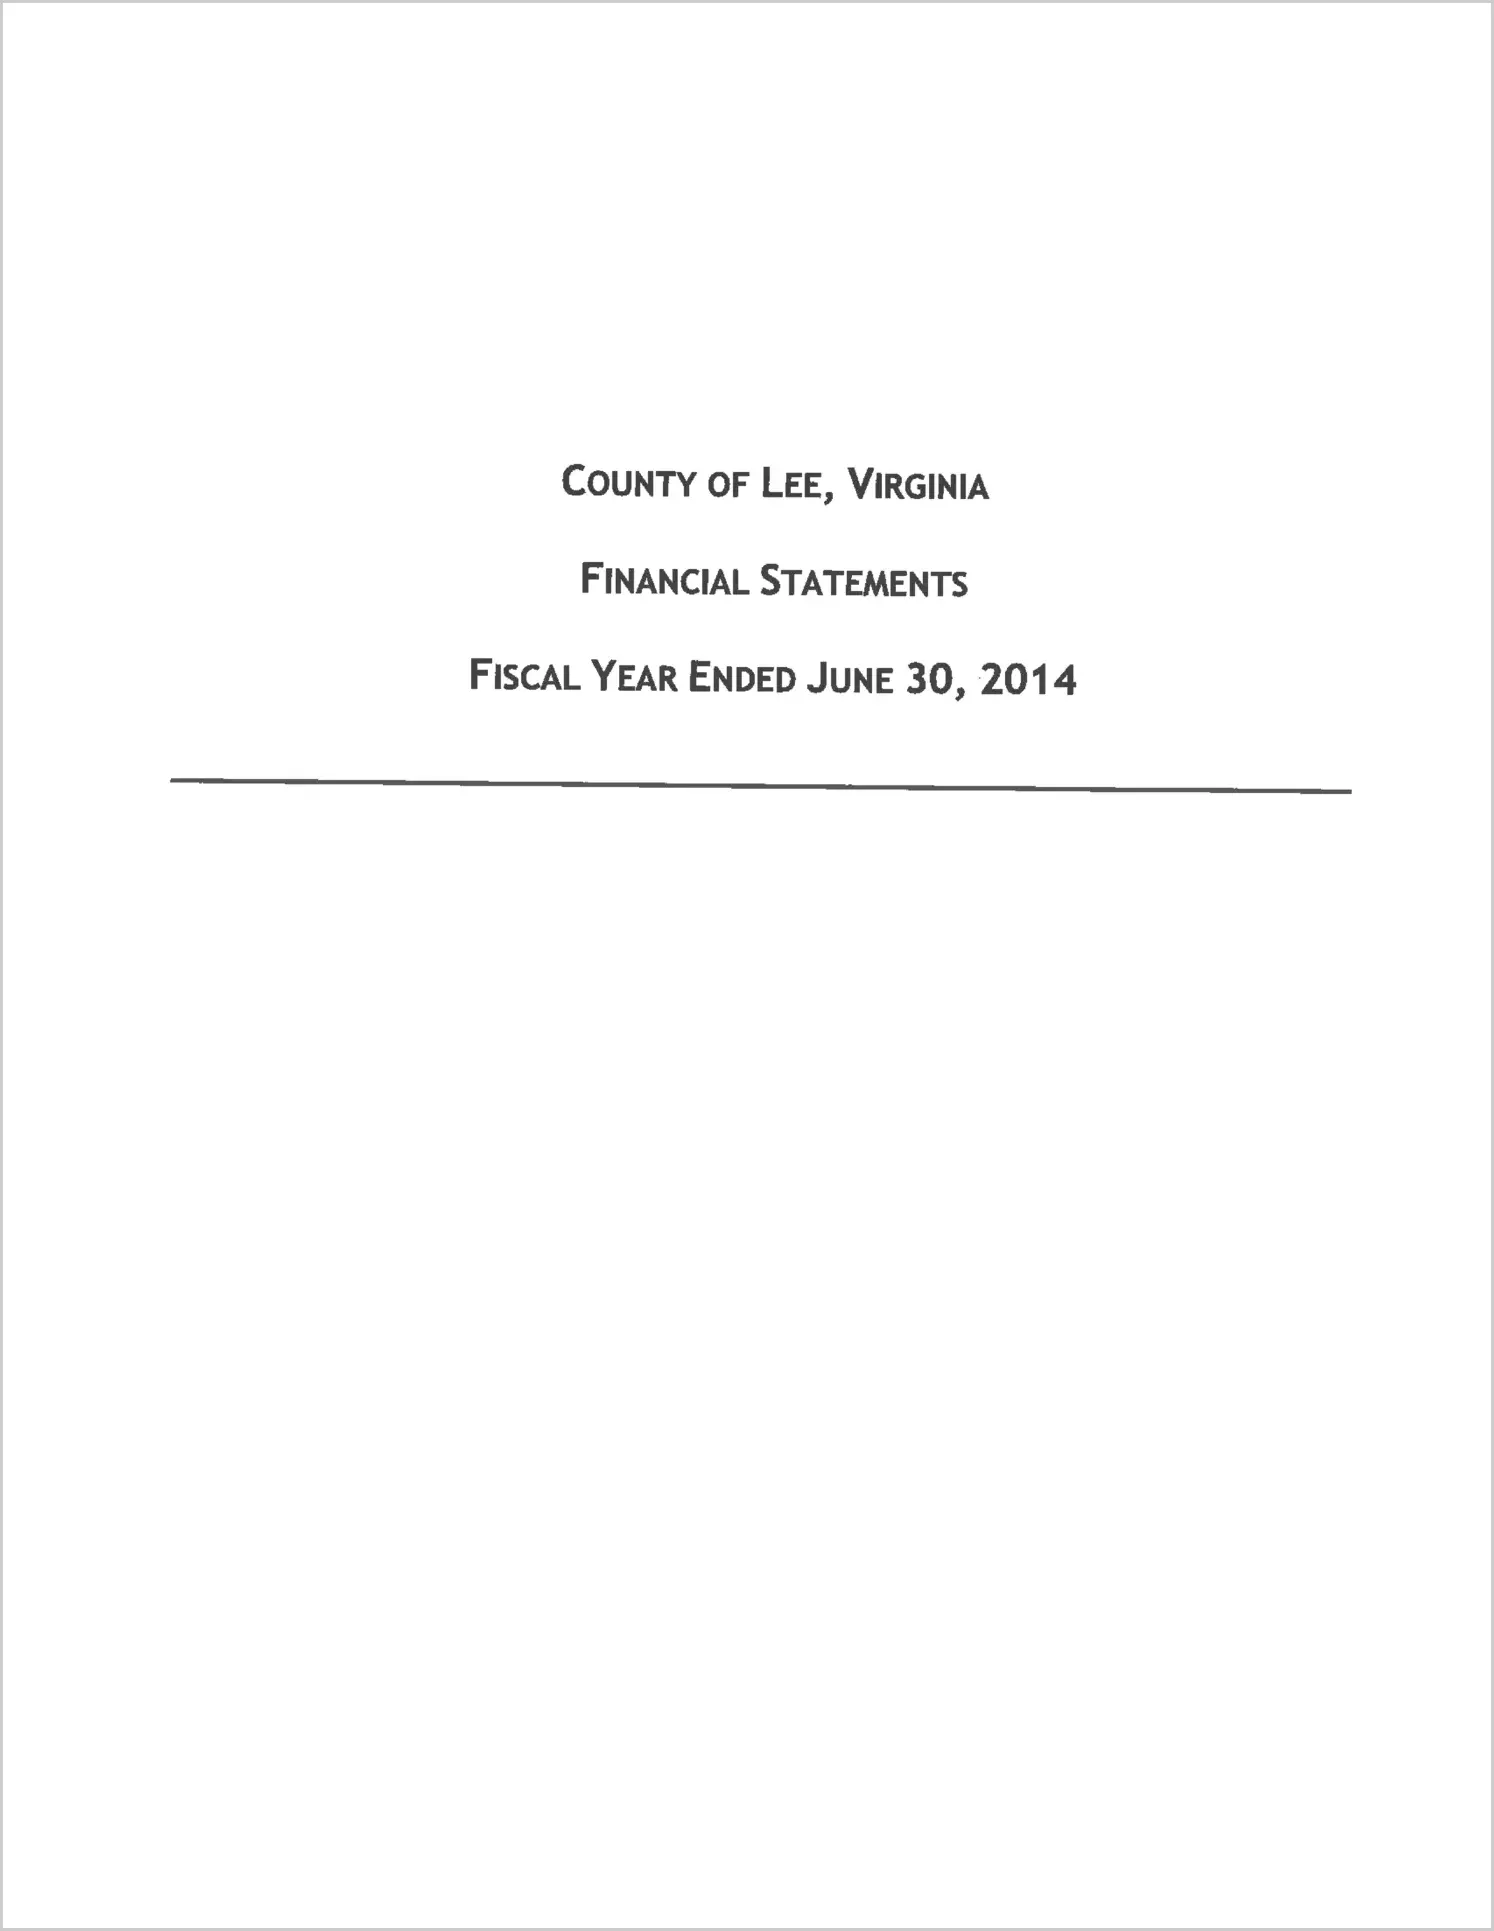 2014 Annual Financial Report for County of Lee